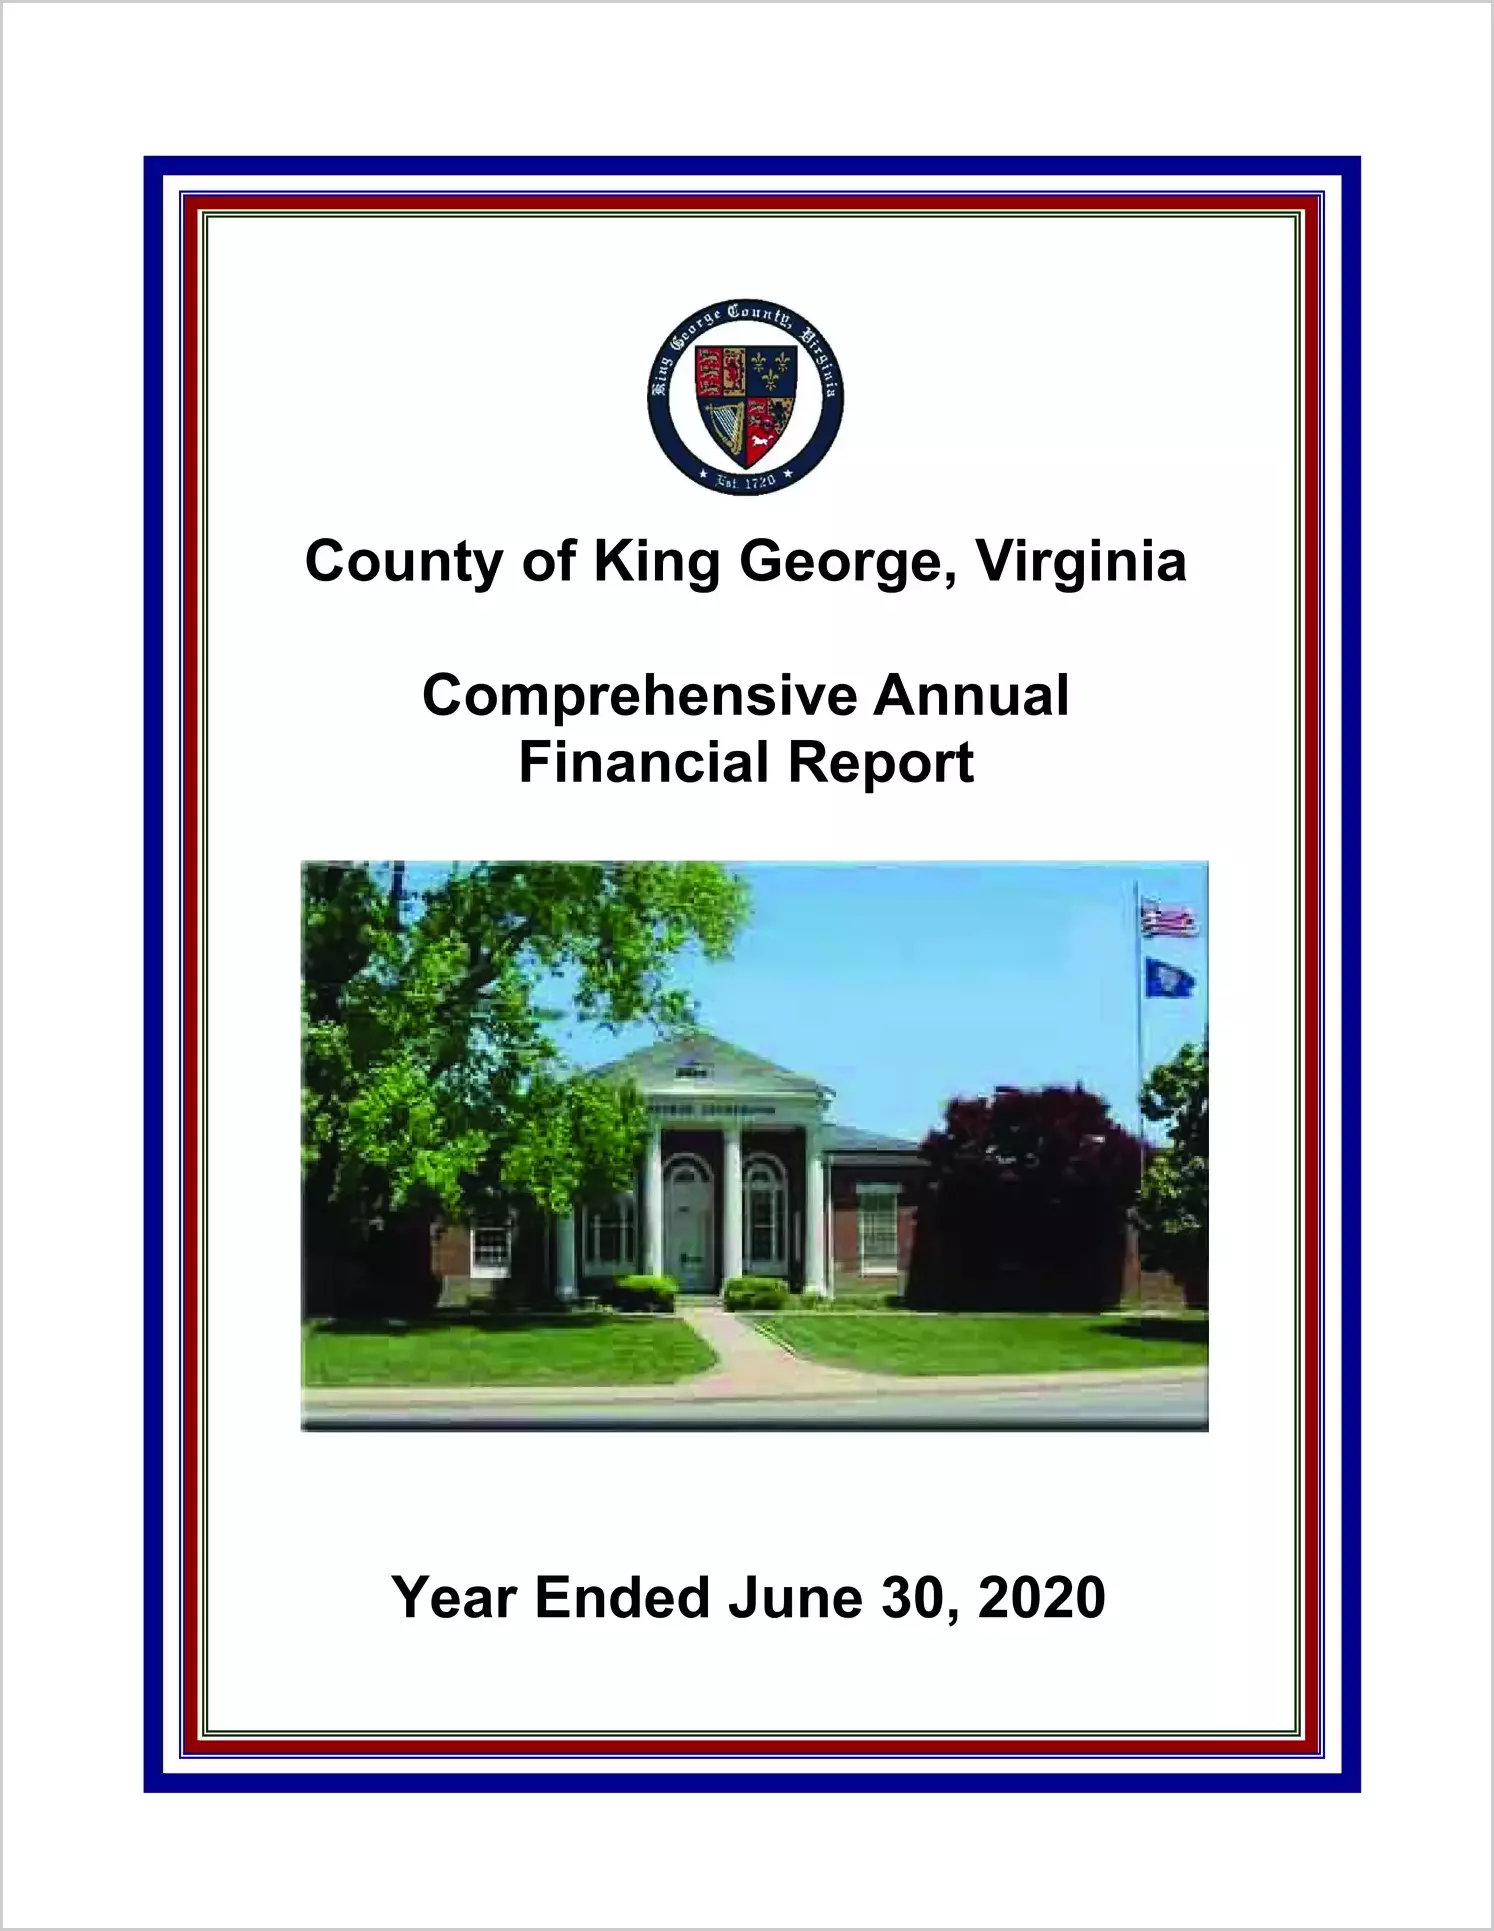 2020 Annual Financial Report for County of King George